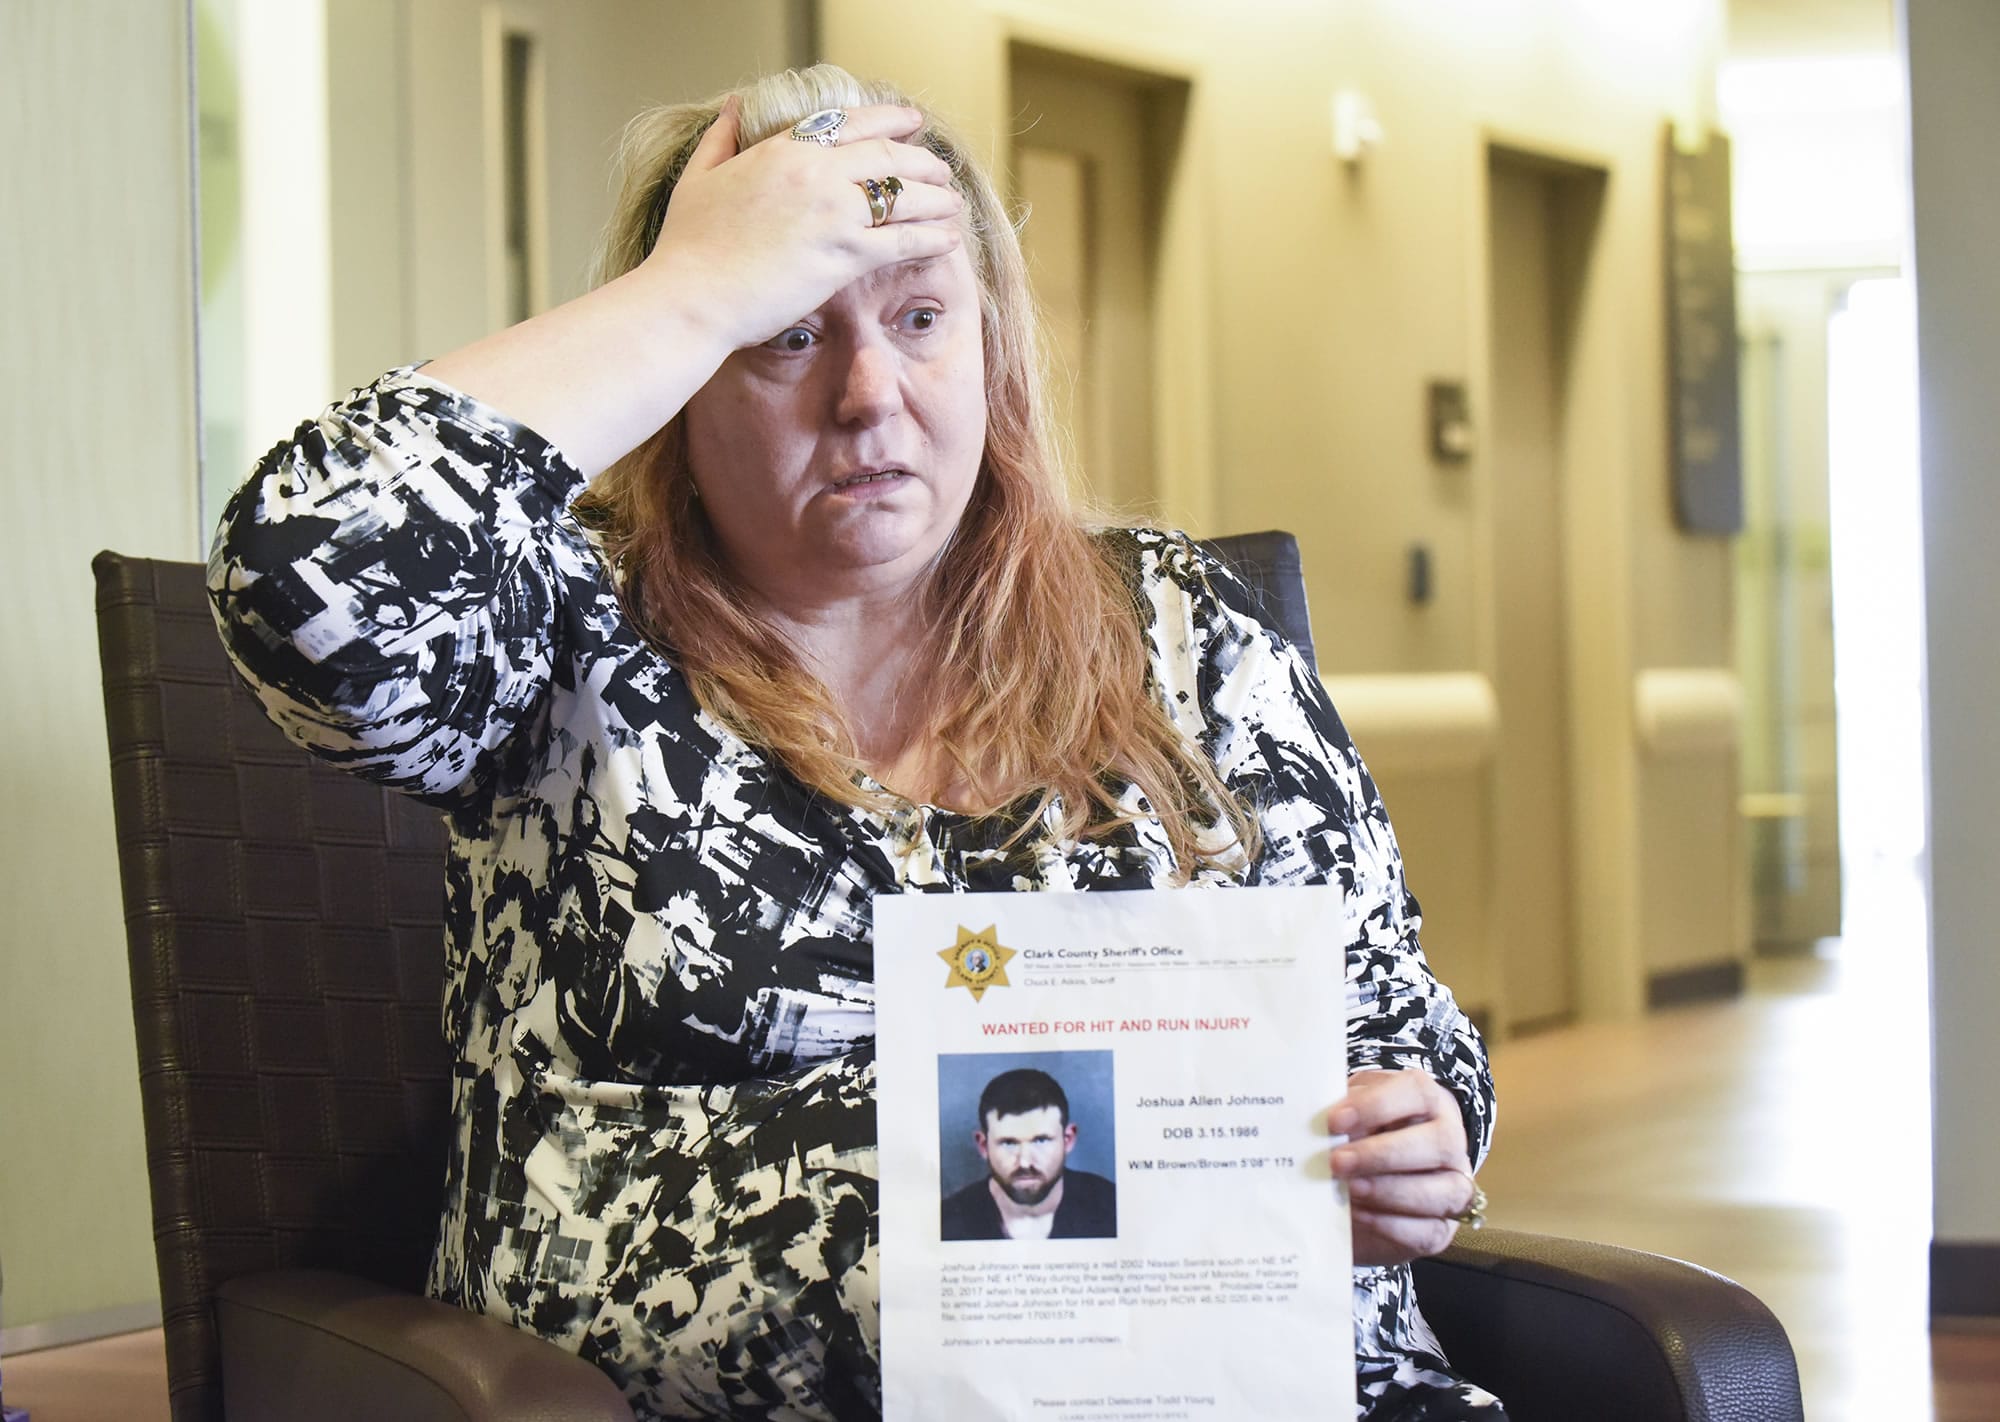 Nancy Peterson, mother of Paul Adams, who has been hospitalized since Feb. 20 when he was struck while walking along the road in Vancouver’s Truman neighborhood, holds a wanted persons poster for Joshua Johnson, the driver suspected in the crash, Friday, March 24, 2017, at PeaceHealth Southwest Medical Center in Vancouver.